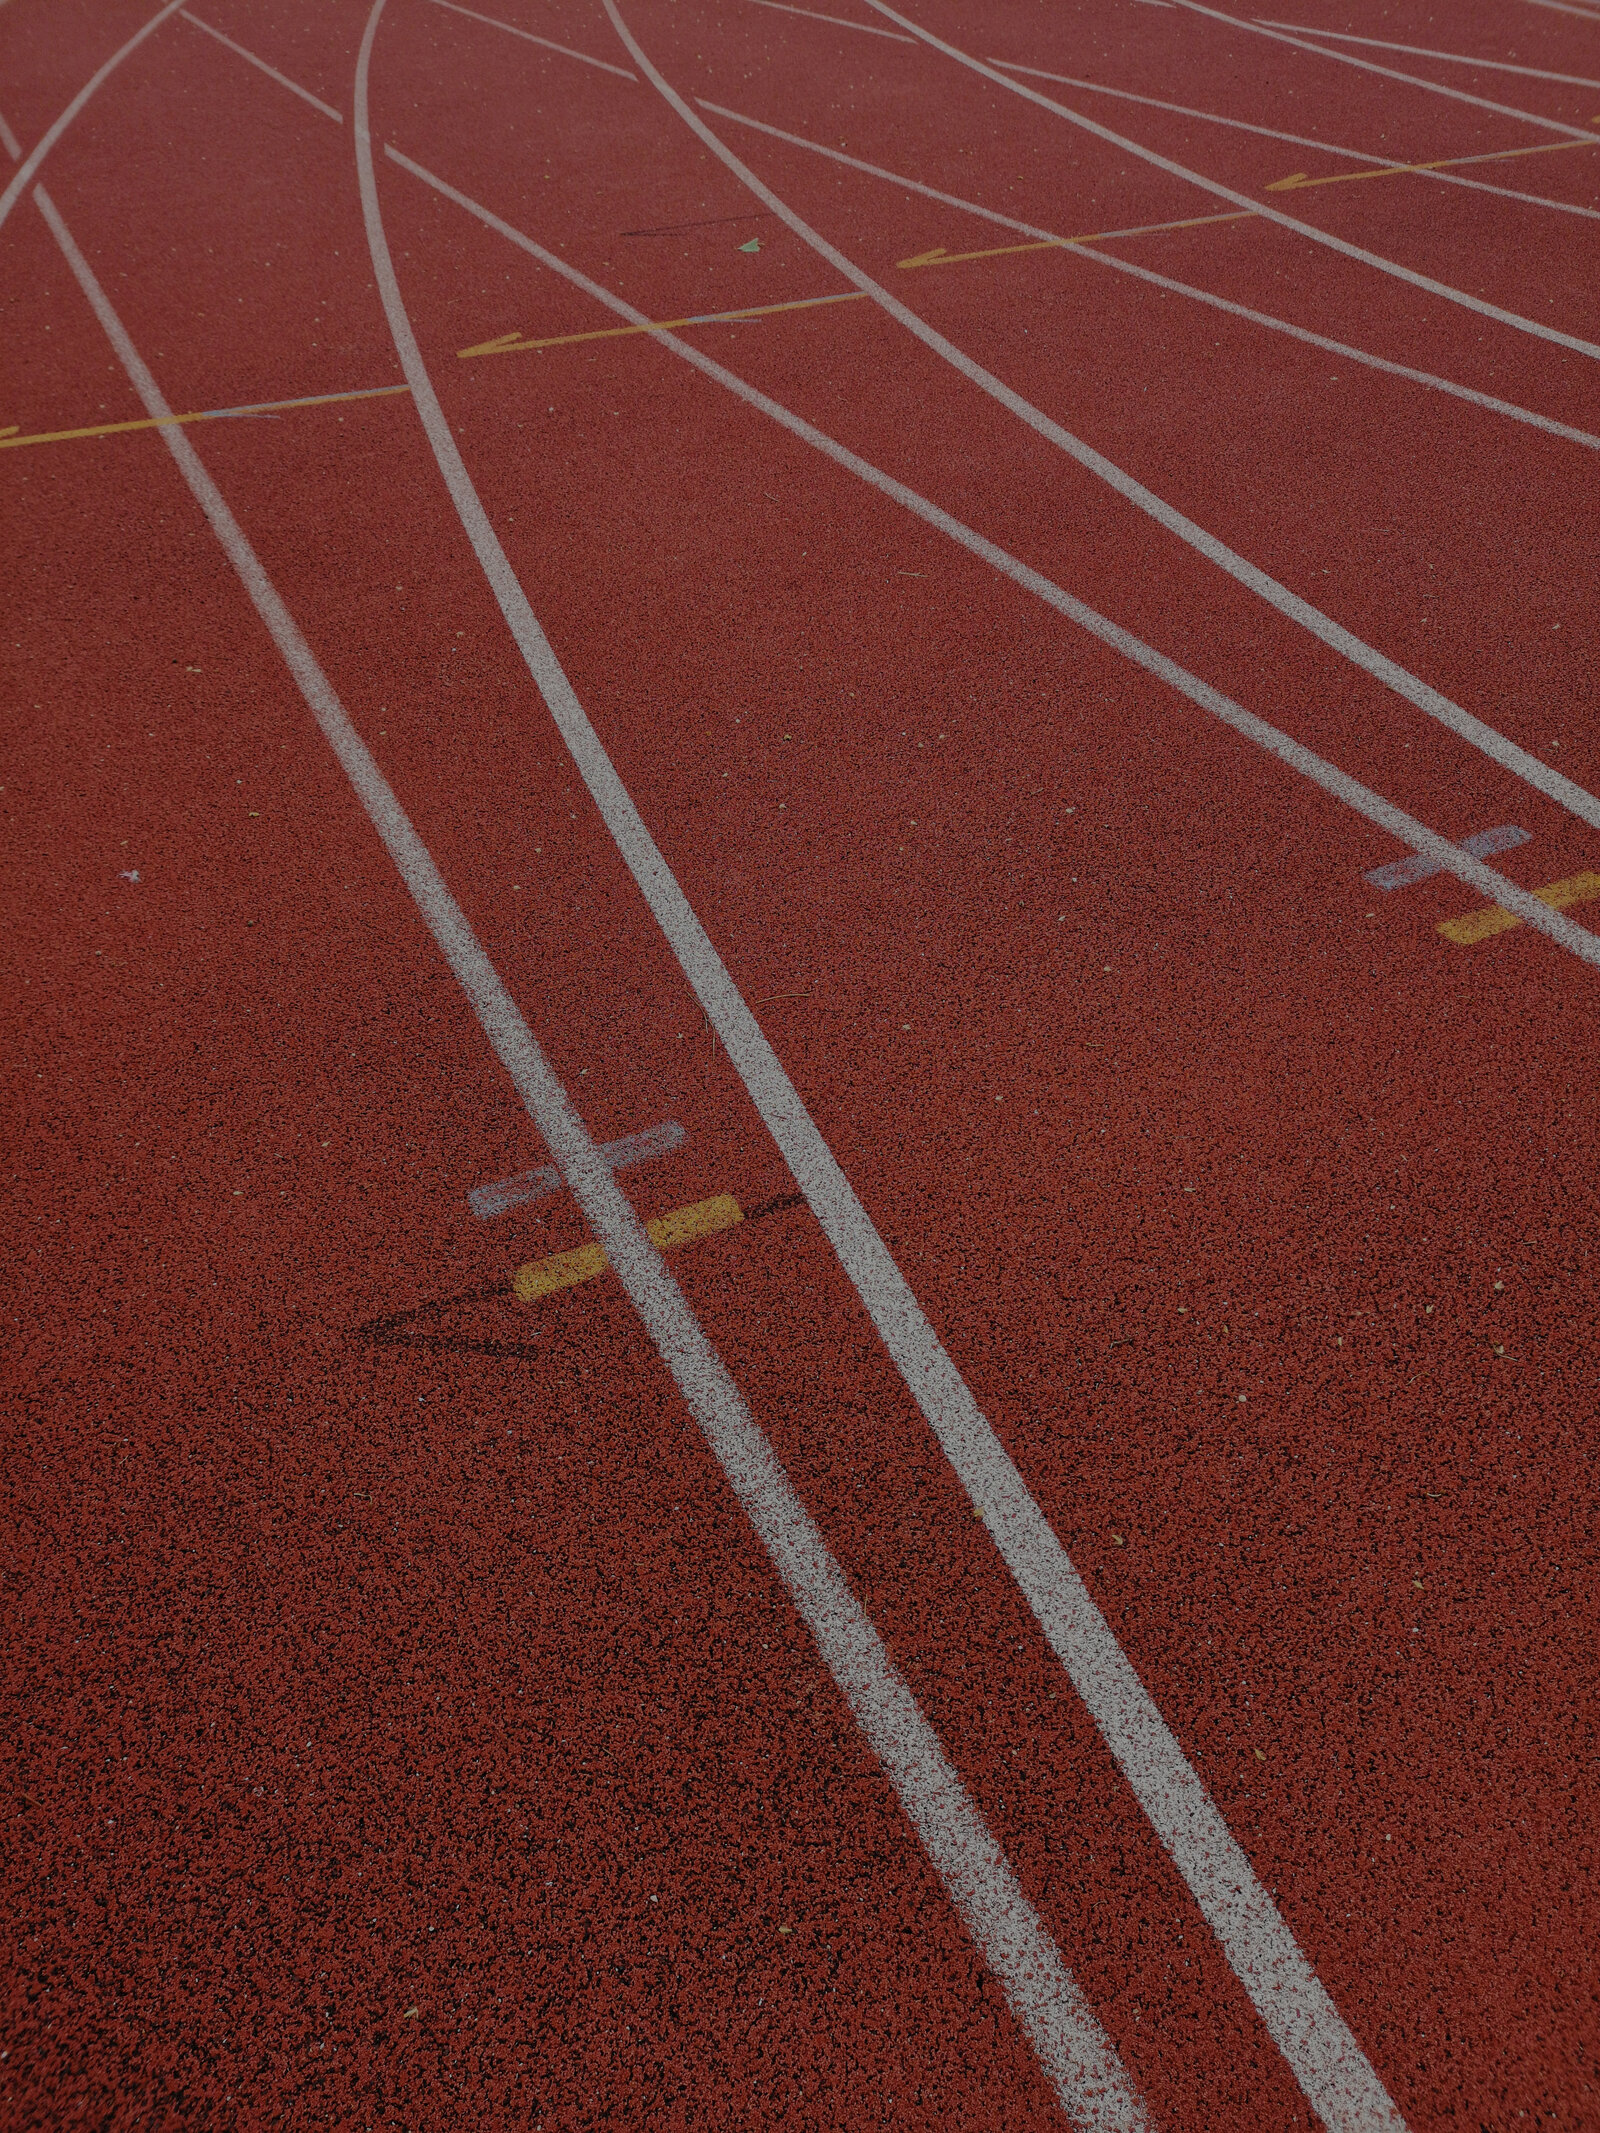 Close-up of a red track with white painted lines